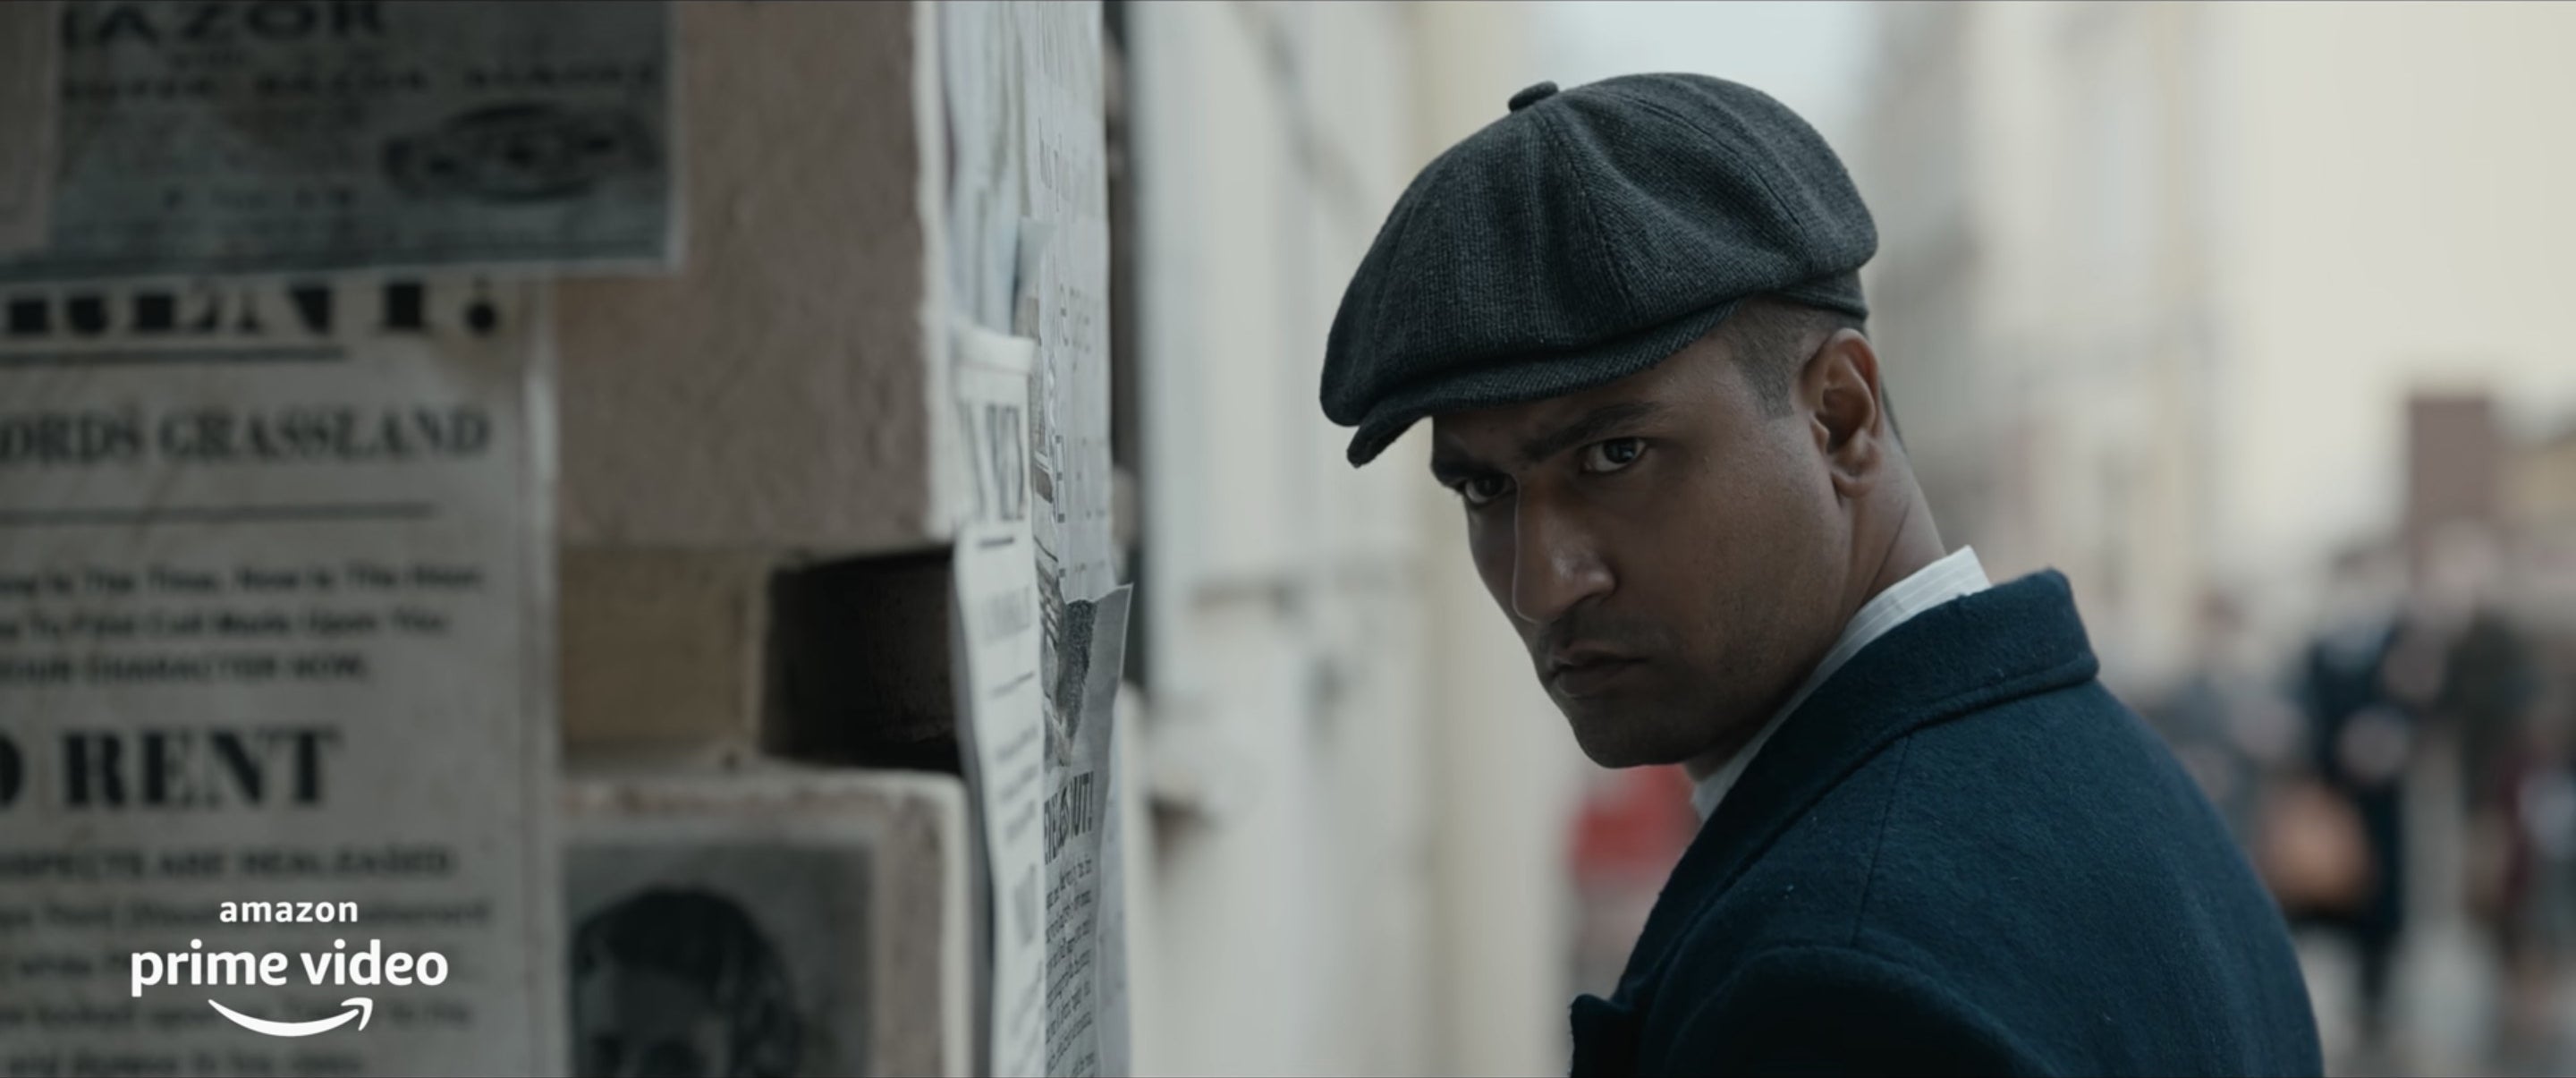 Vicky Kaushal in a still from the film